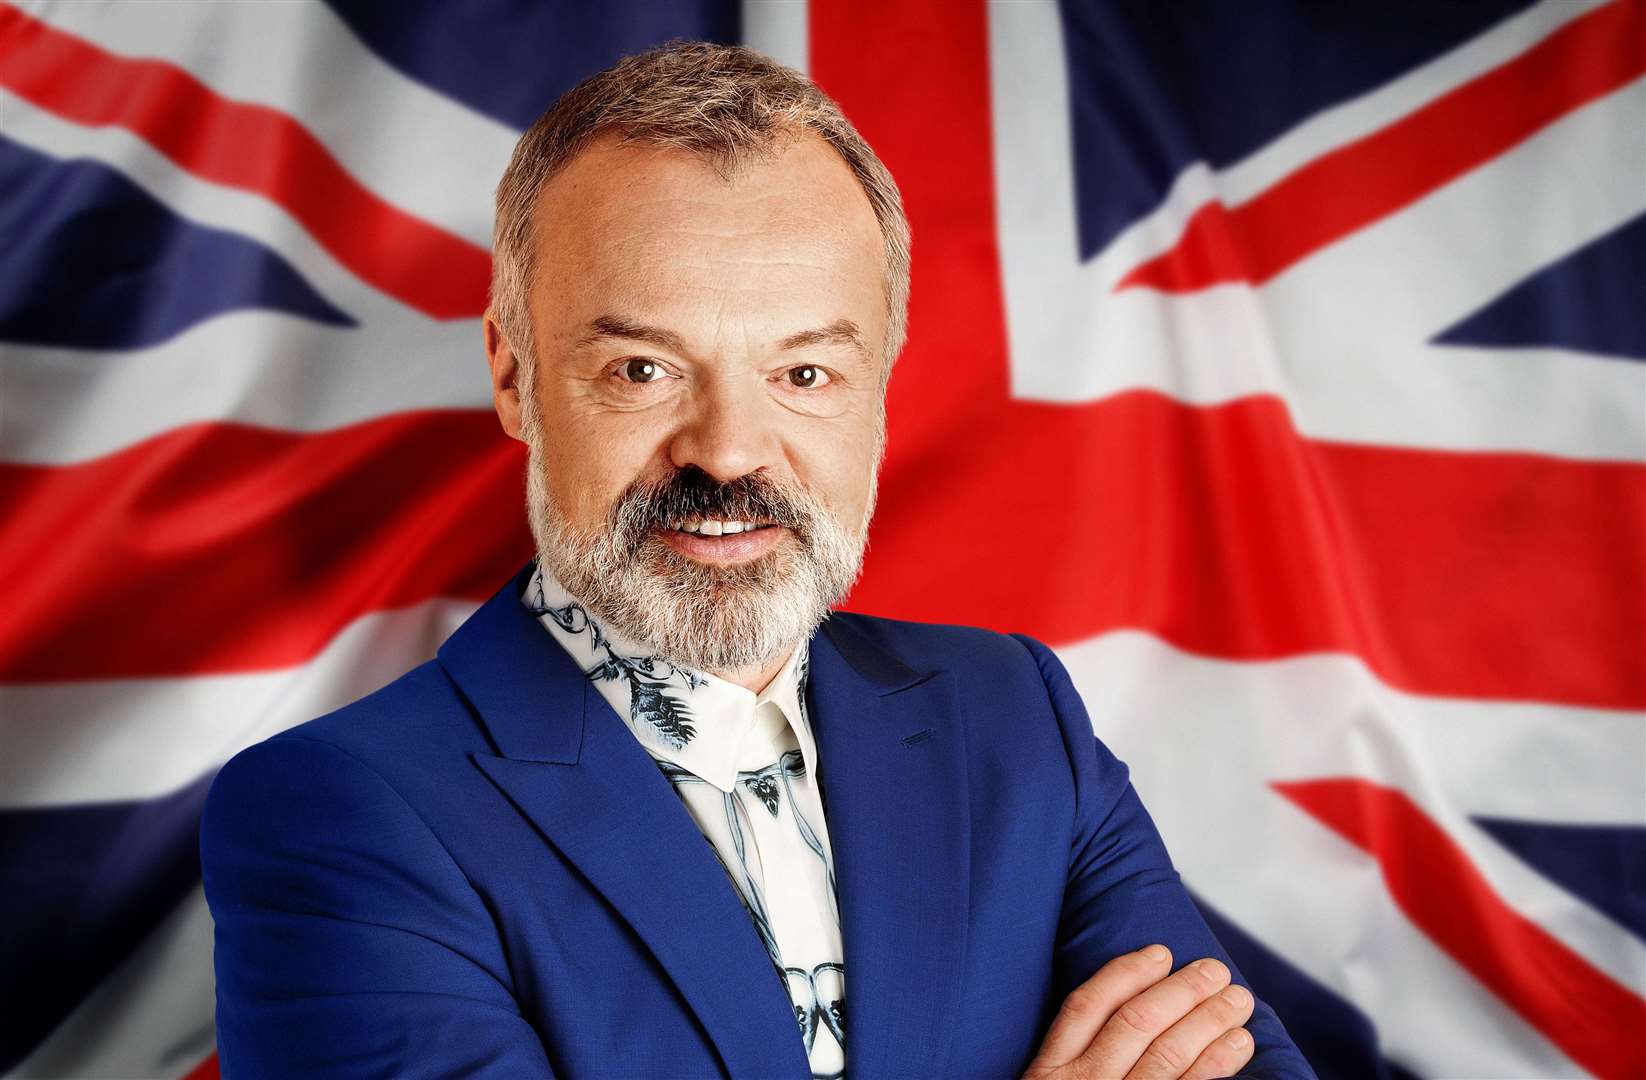 Graham Norton commentator of the Eurovision Song Contest Picture: So TV - Photographer: Christopher Baines